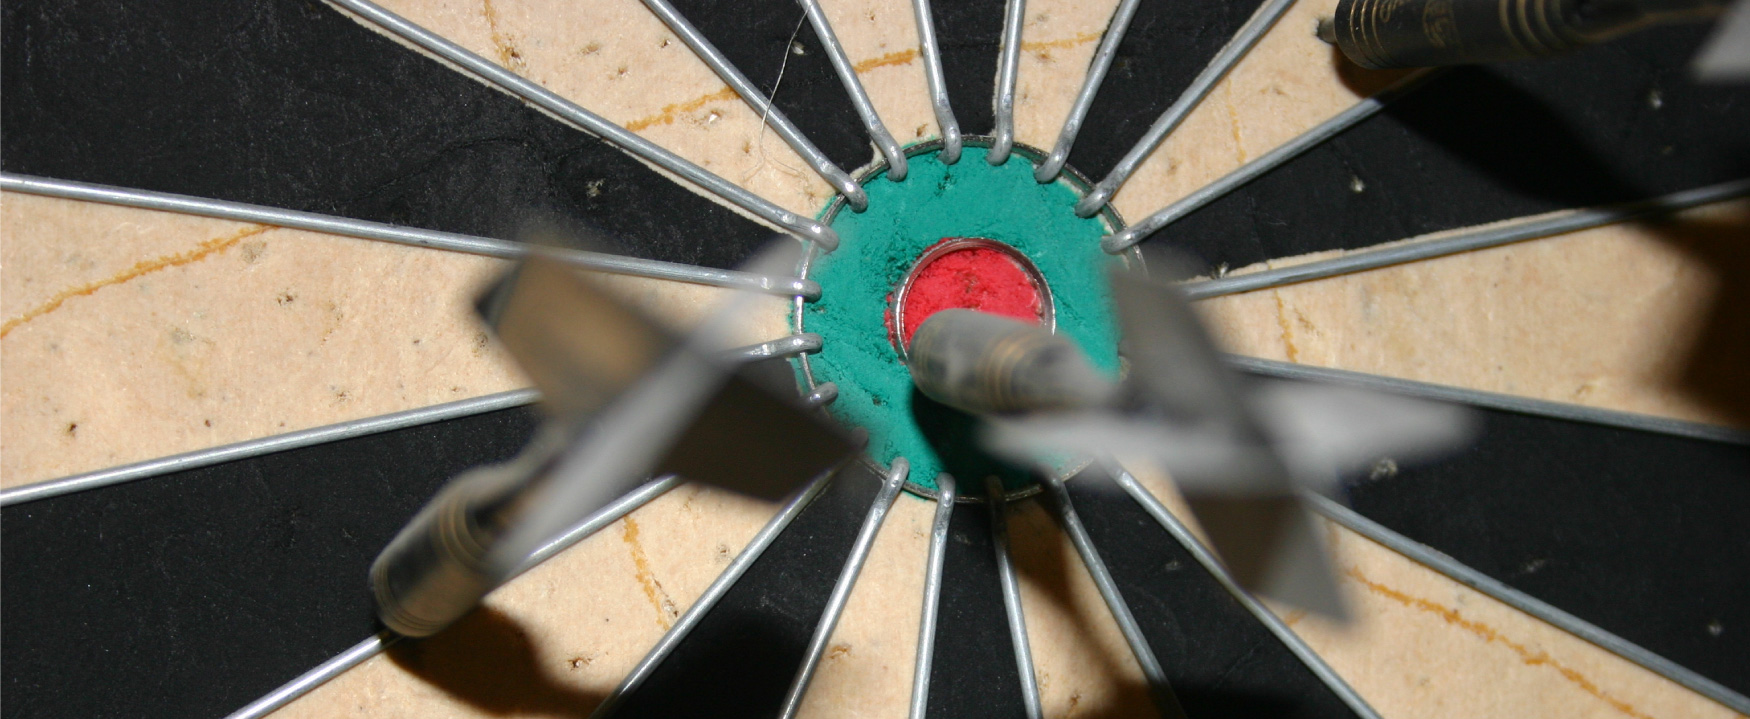 A photograph shows a dart board with a few darts stuck to the board, on is sticking into the bullseye.